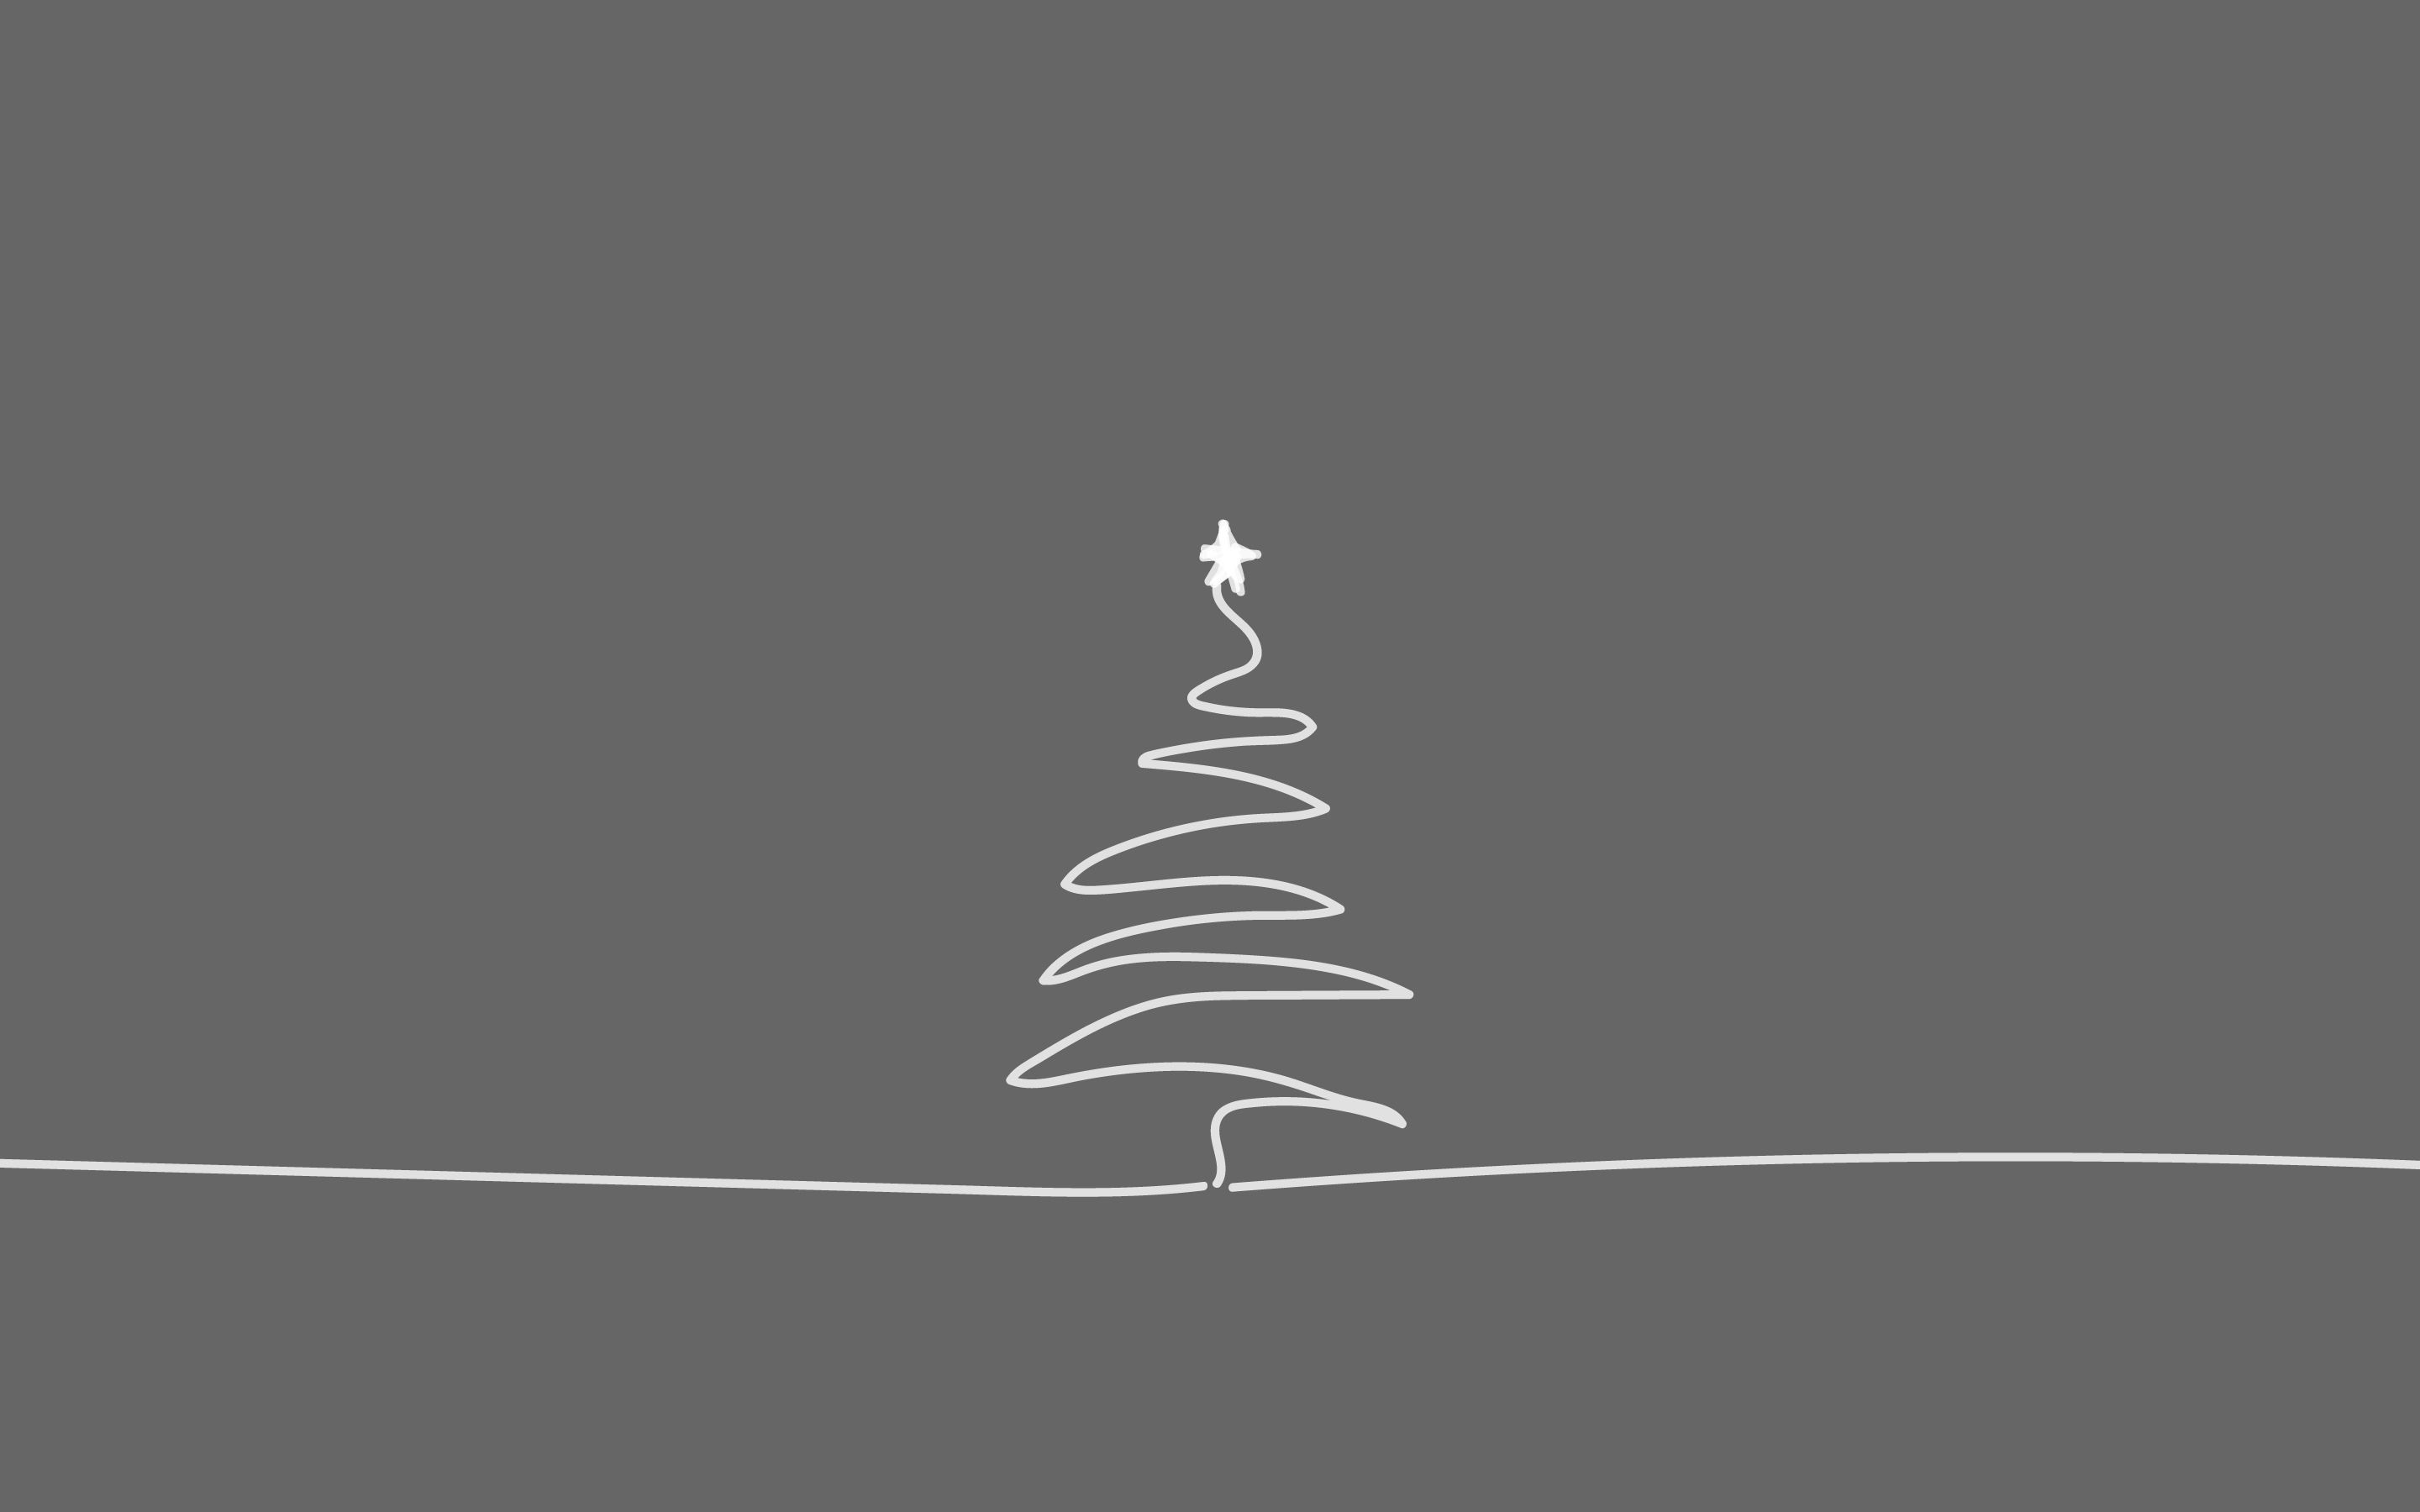 Minimalistic Christmas Wallpapers Wallpaper Cave